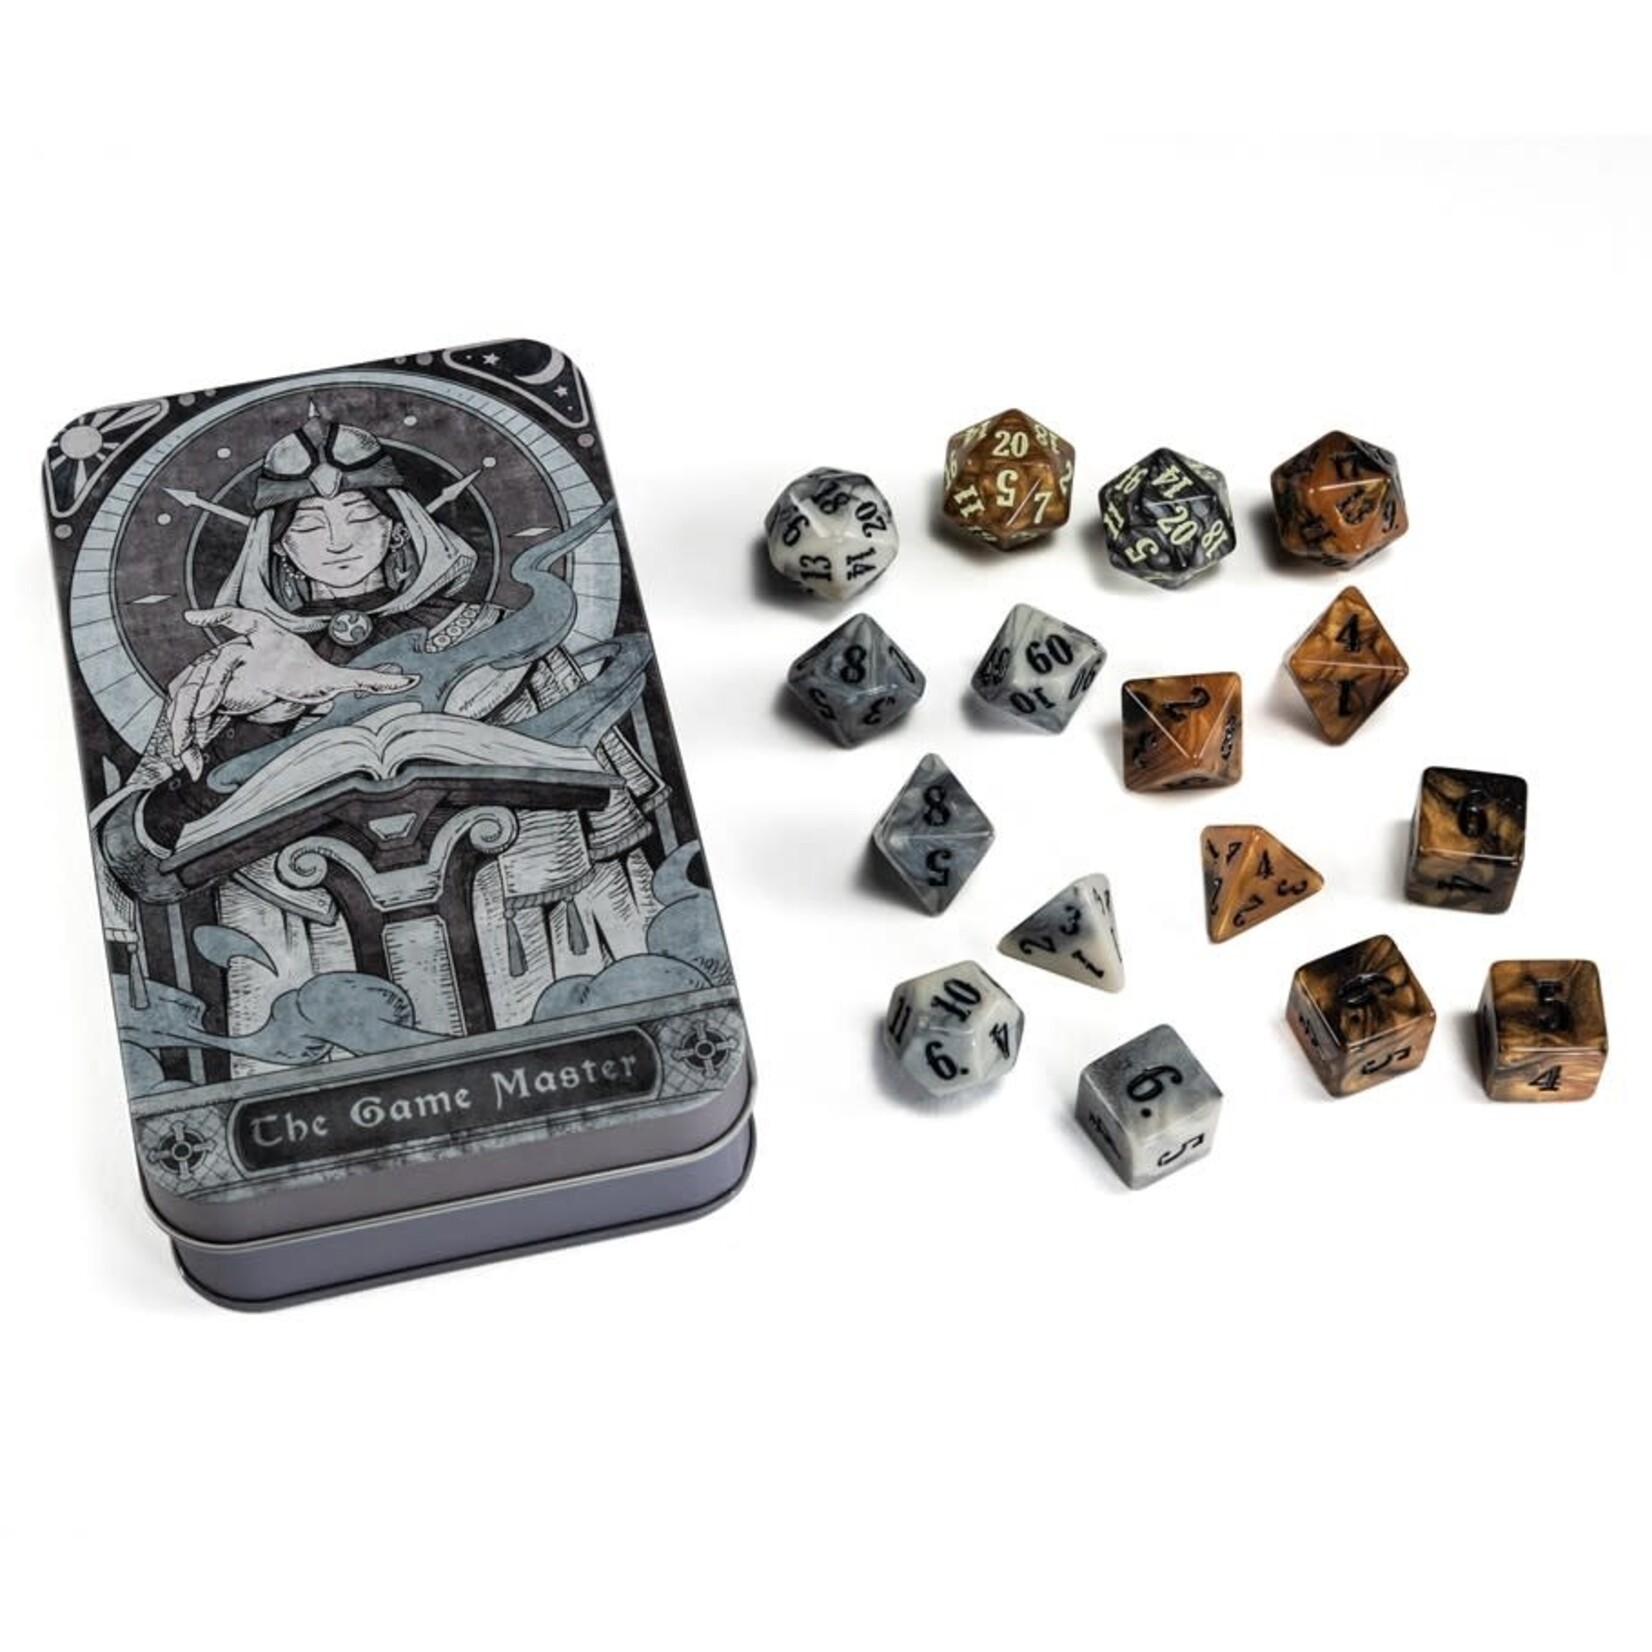 Beadle & Grimm RPG Class Dice Set: The Game Master